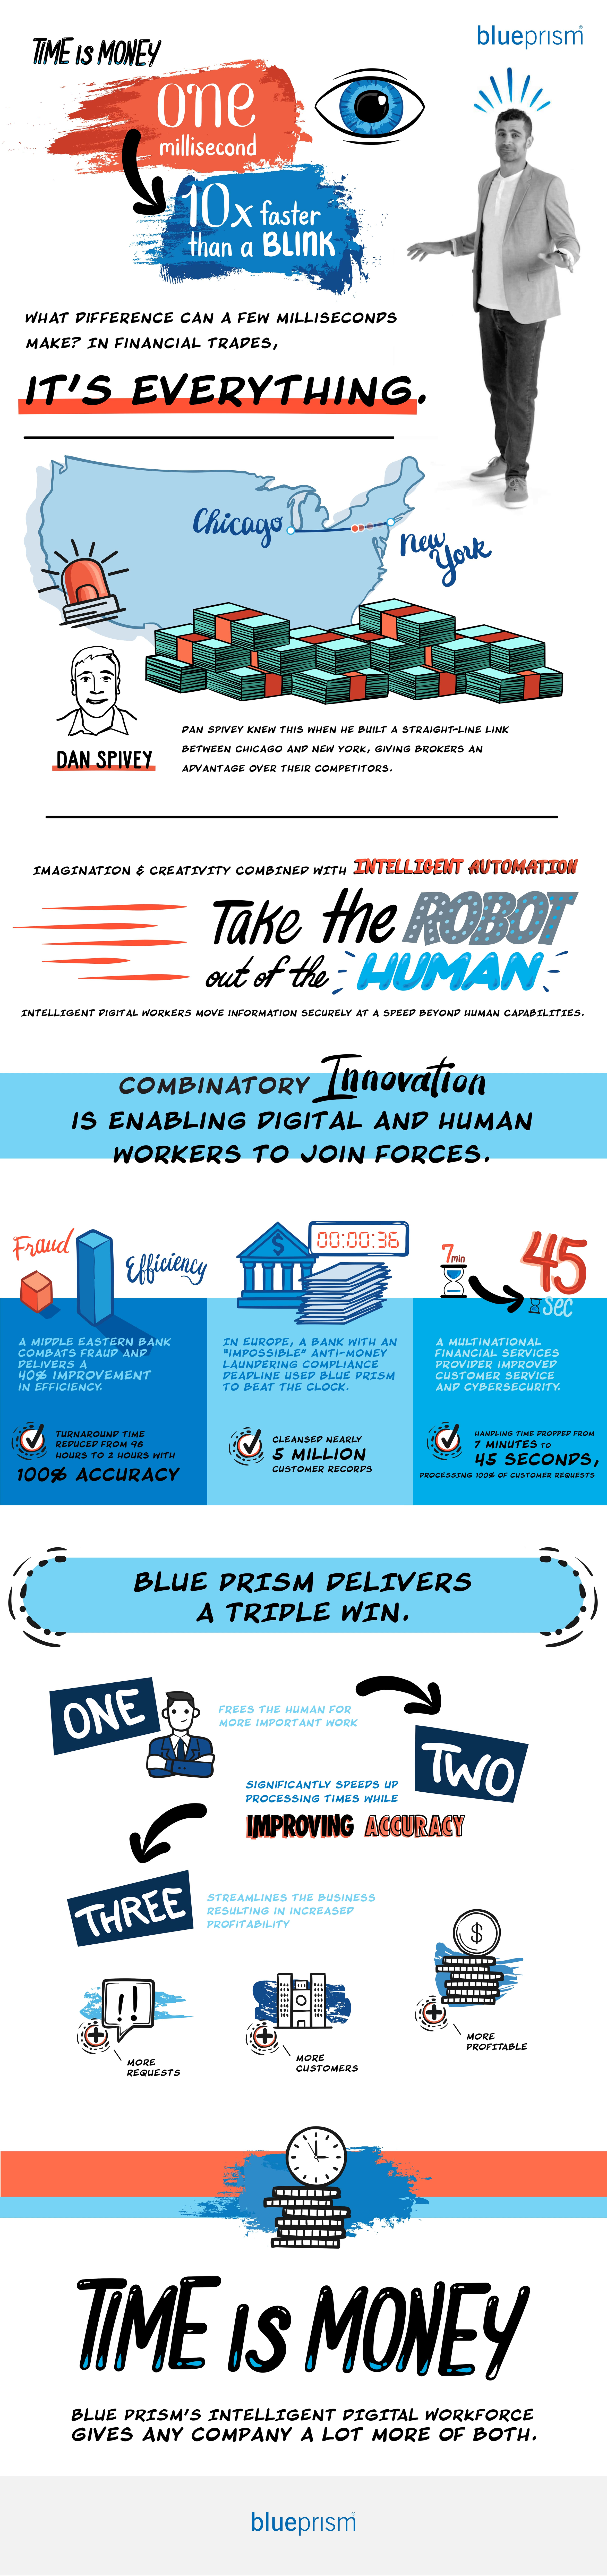 Digital and Human Workers Join Forces with Combinatory Innovation Infographic